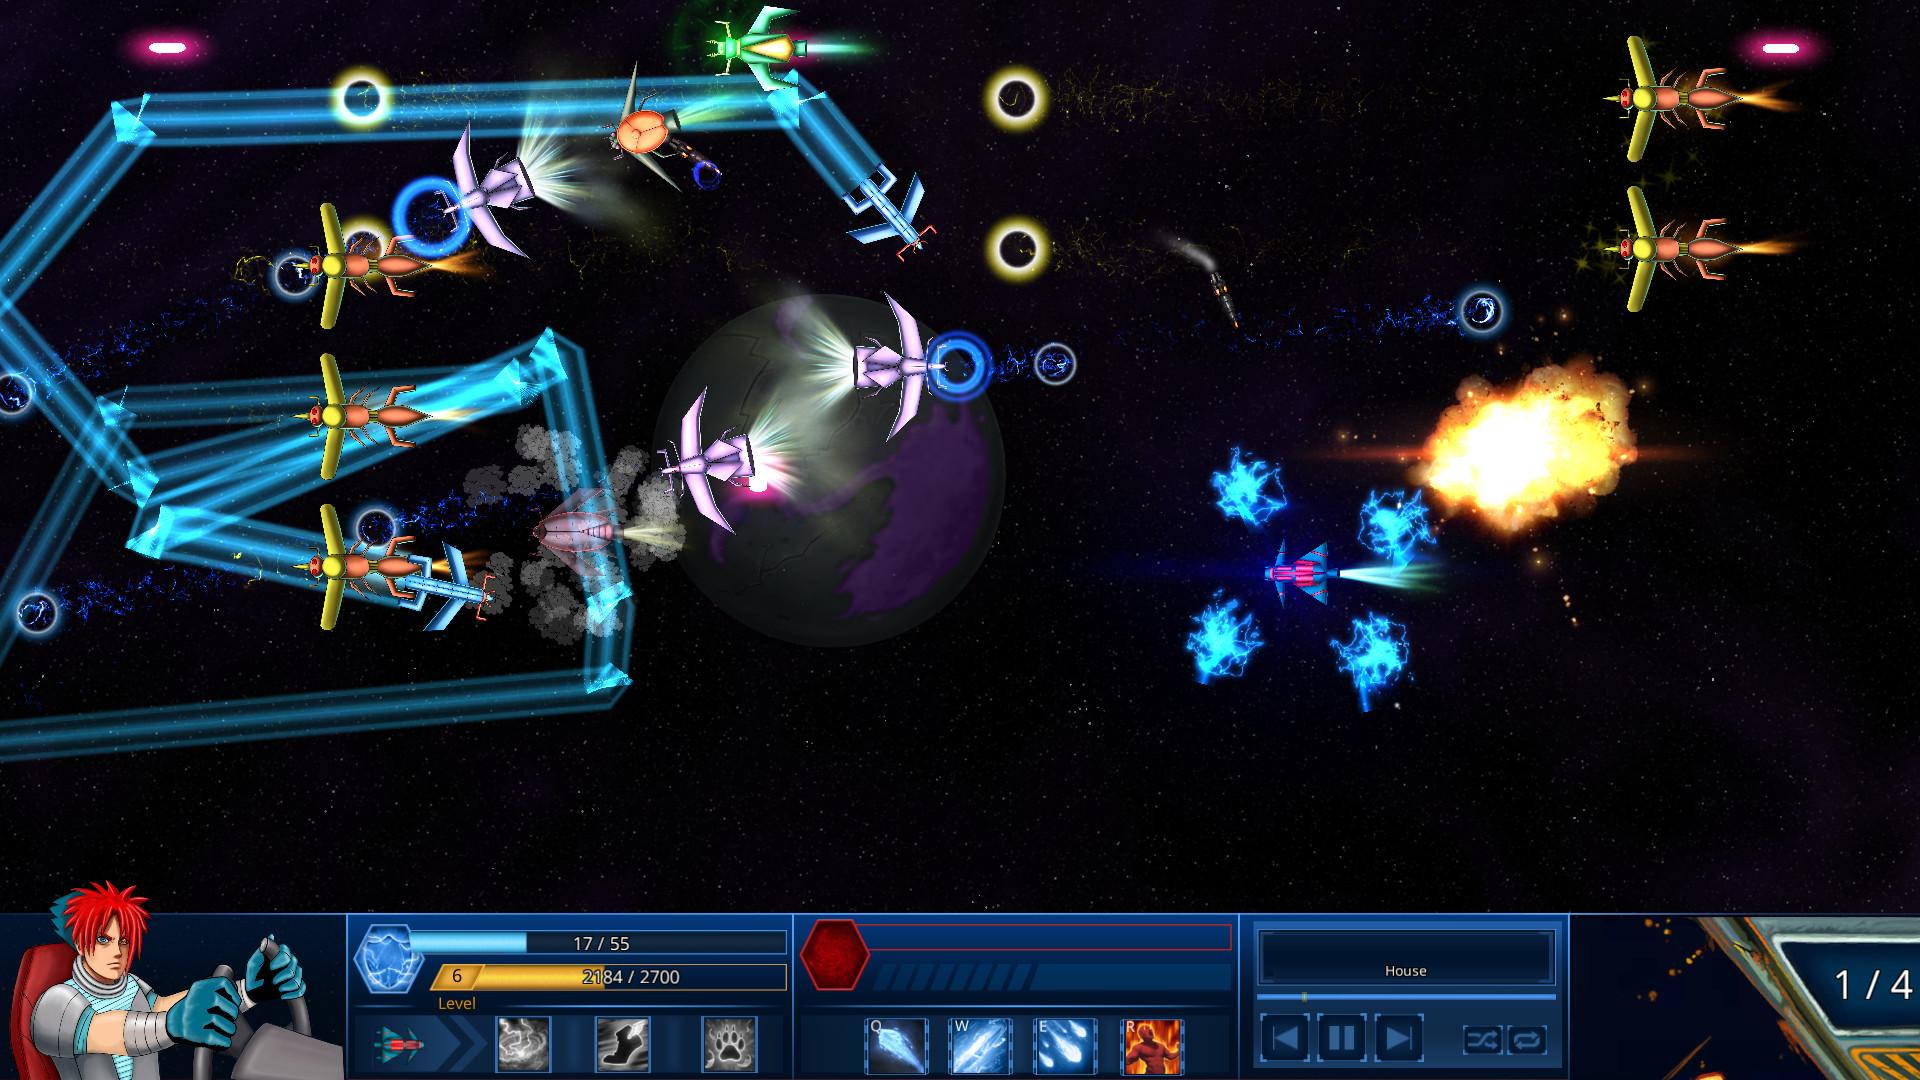 Screenshot №31 from game Survive in Space